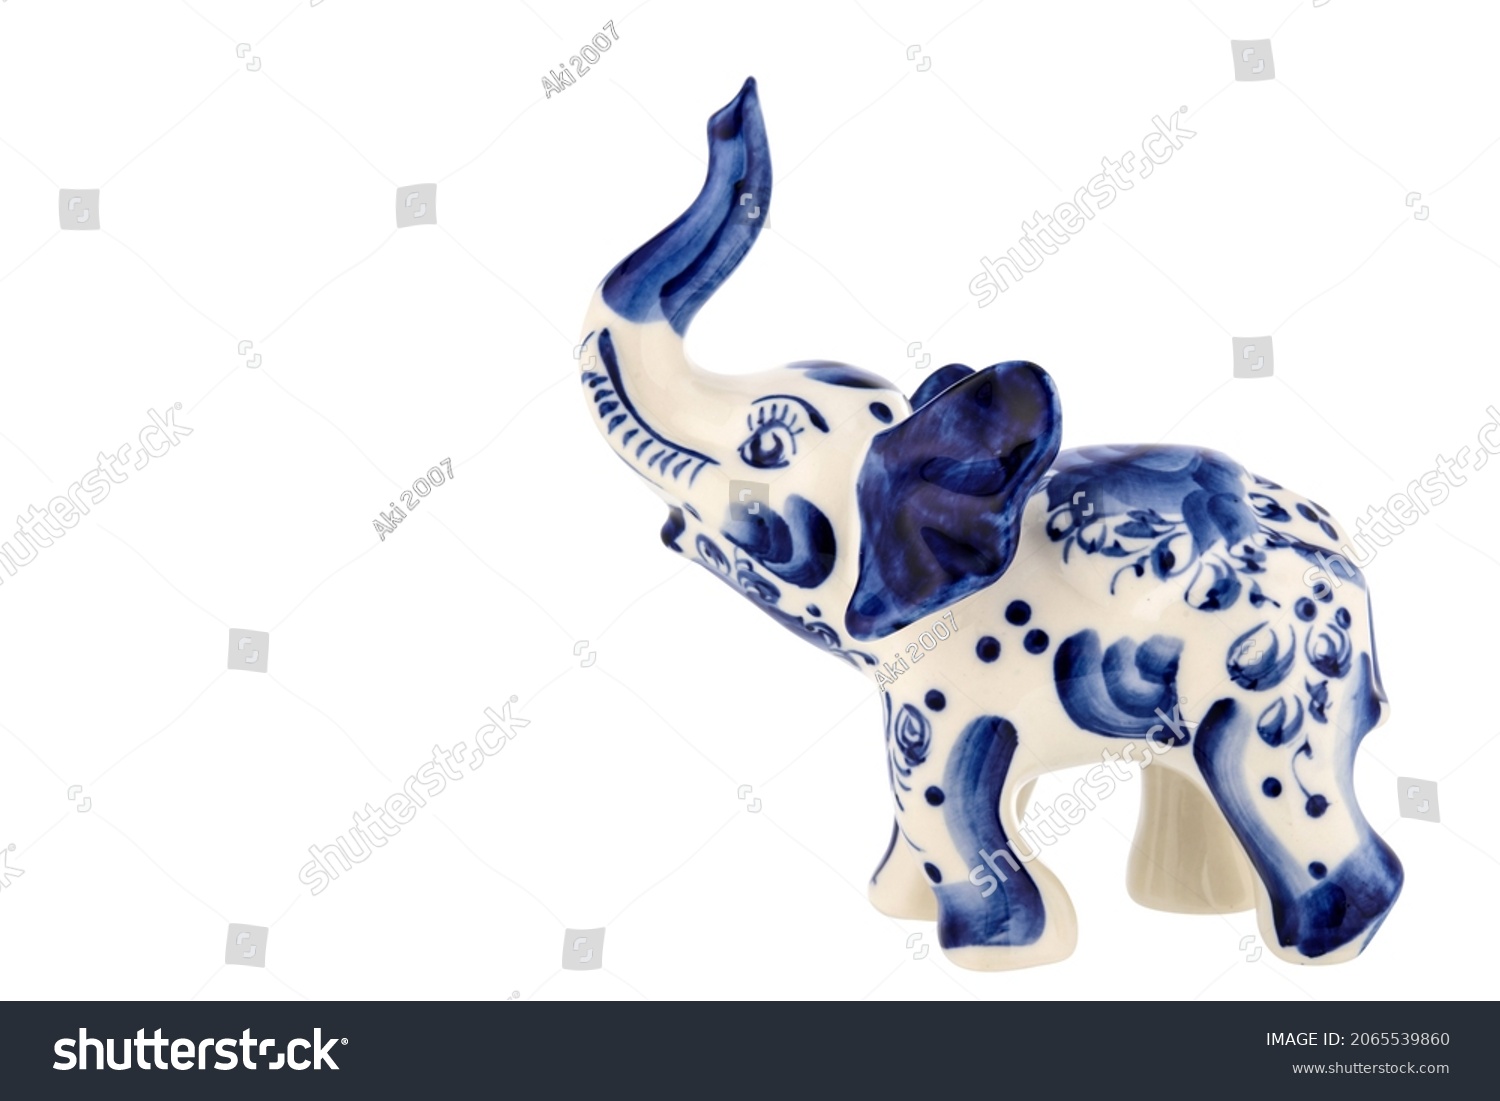 Cute Elephant Figurine Sculpture Porcelain Ceramic Isolated on white background. Cobalt Blue color is traditional folk painting. Decor for interior of premises. #2065539860